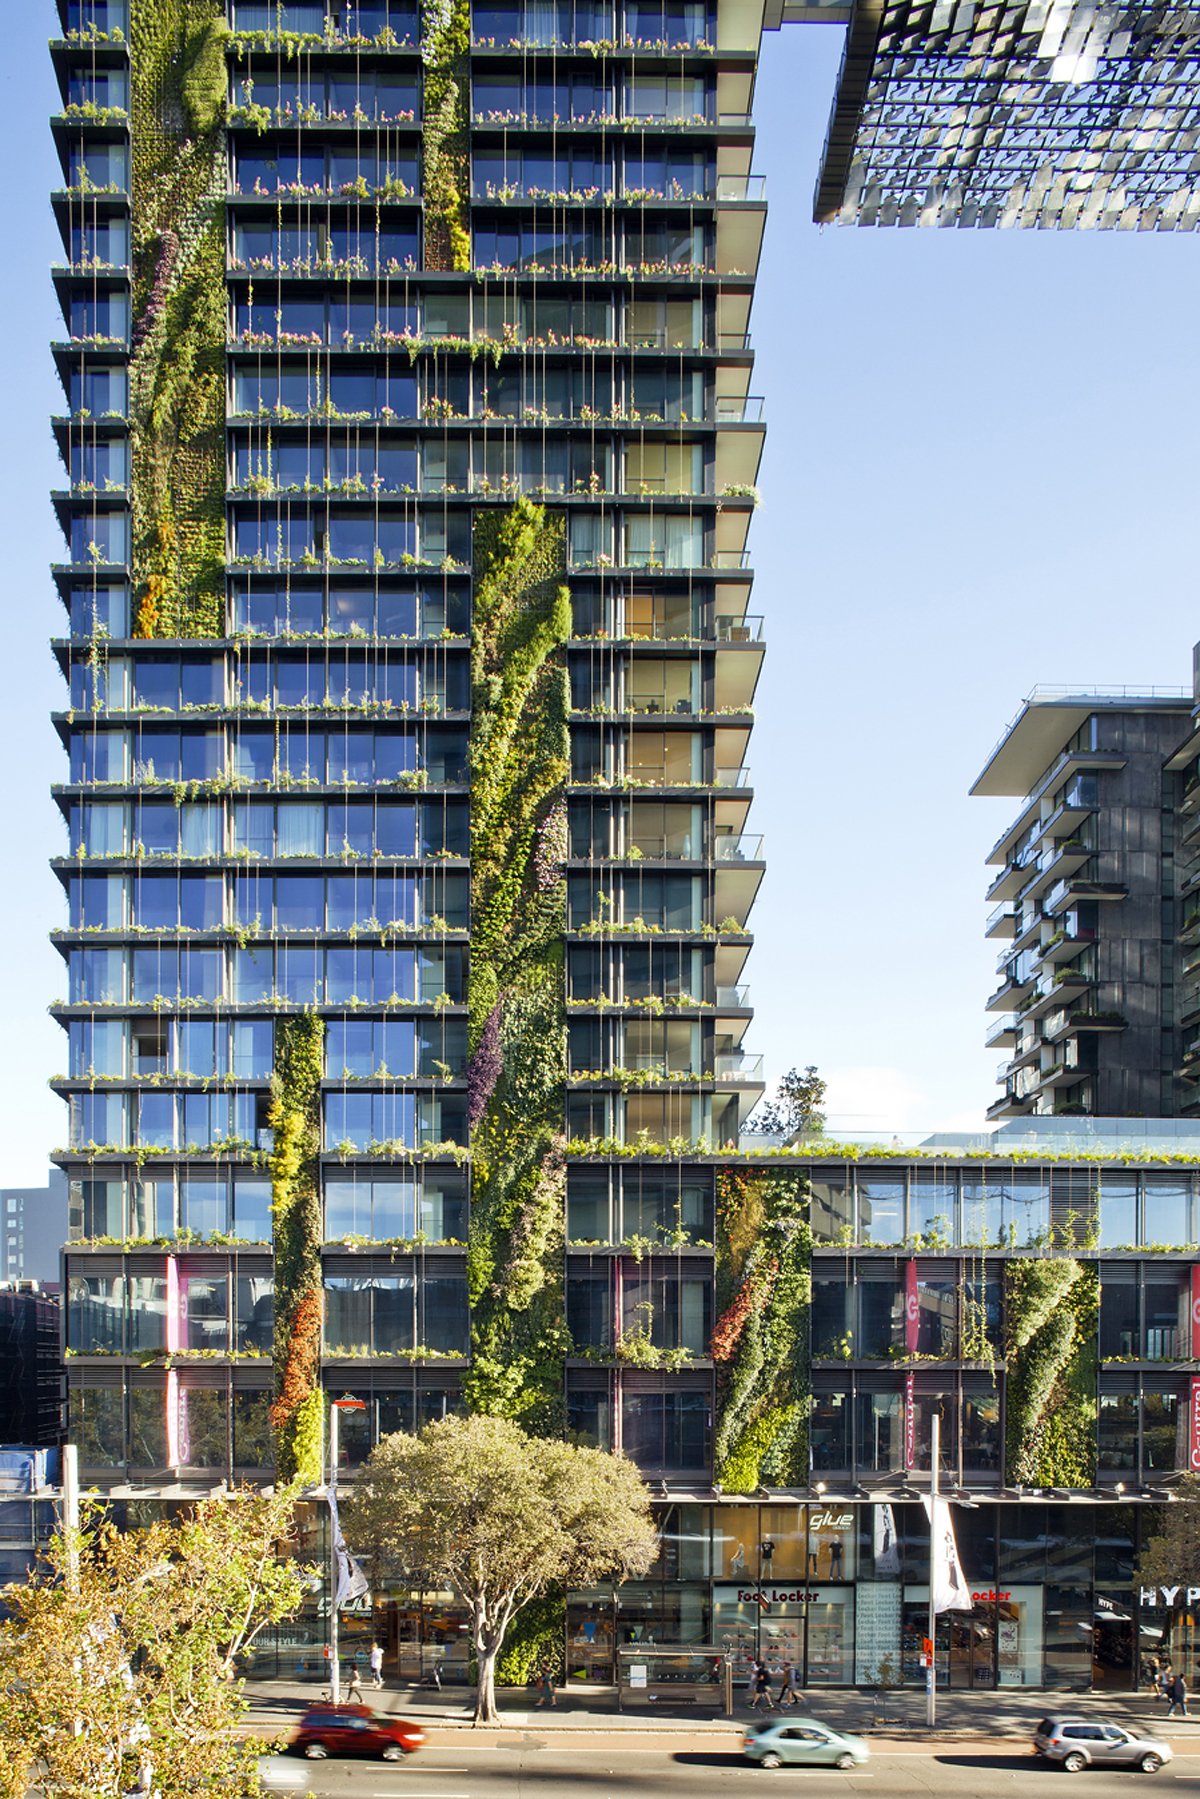 5 one central park east with vertical gardens on each floor of this sydney australia building one central parks east tower looks out on a spacious park it also features restaurants shopping and other luxury amenit Pogled u nebo: Najbolji oblakoderi na svetu